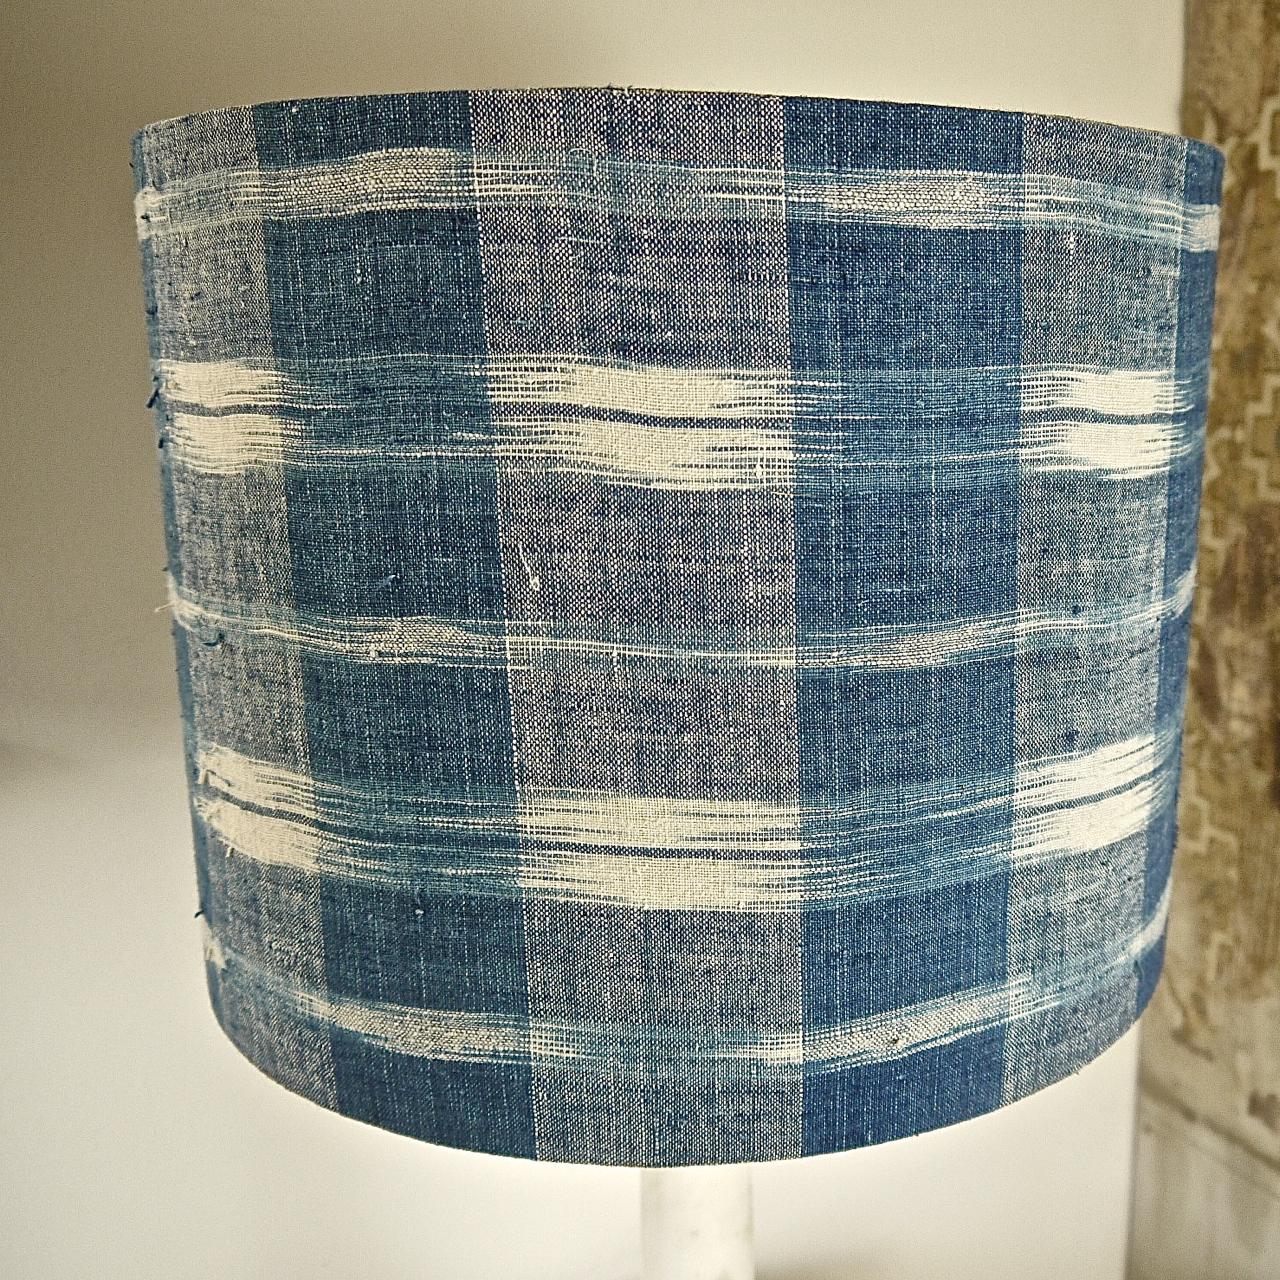 Pair of French late 18th century beautifully and softly faded indigo ikat/flamme coarsely woven cotton covering a drum lampshade.
The inside is covered in an off white cotton.